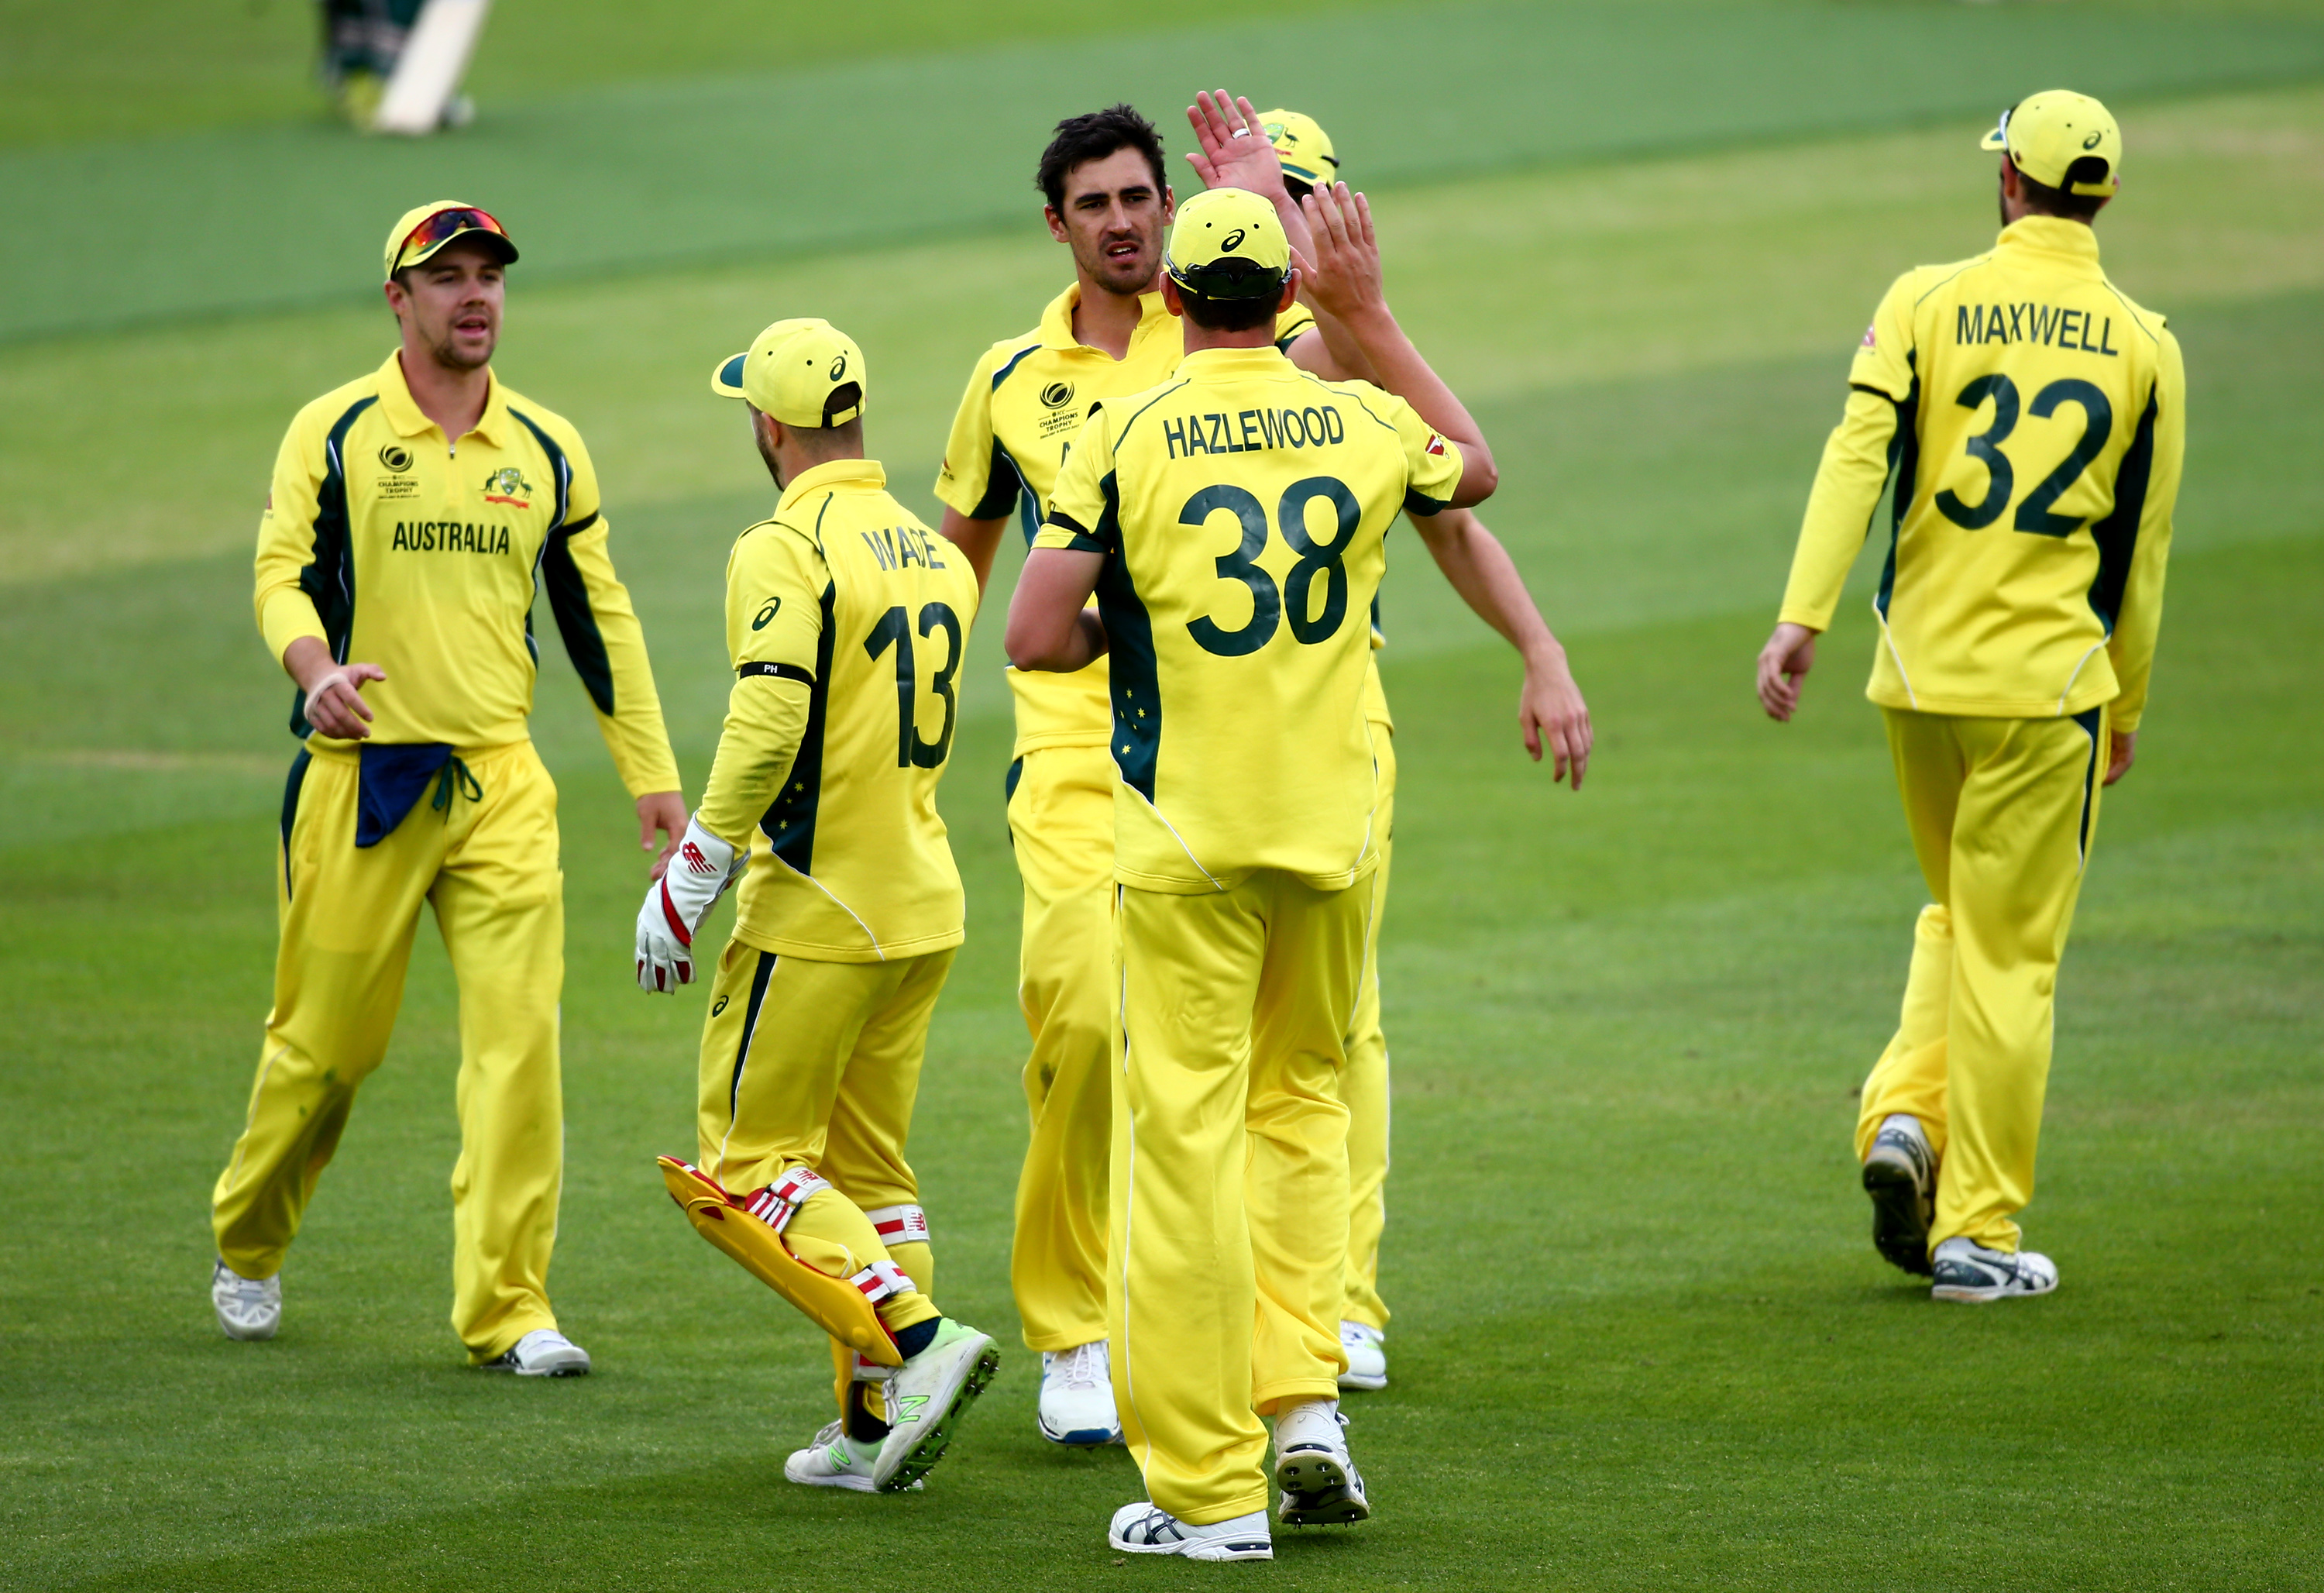 India vs Australia | Mitchell Starc recalled to T20 squad to cover for Billy Stanlake